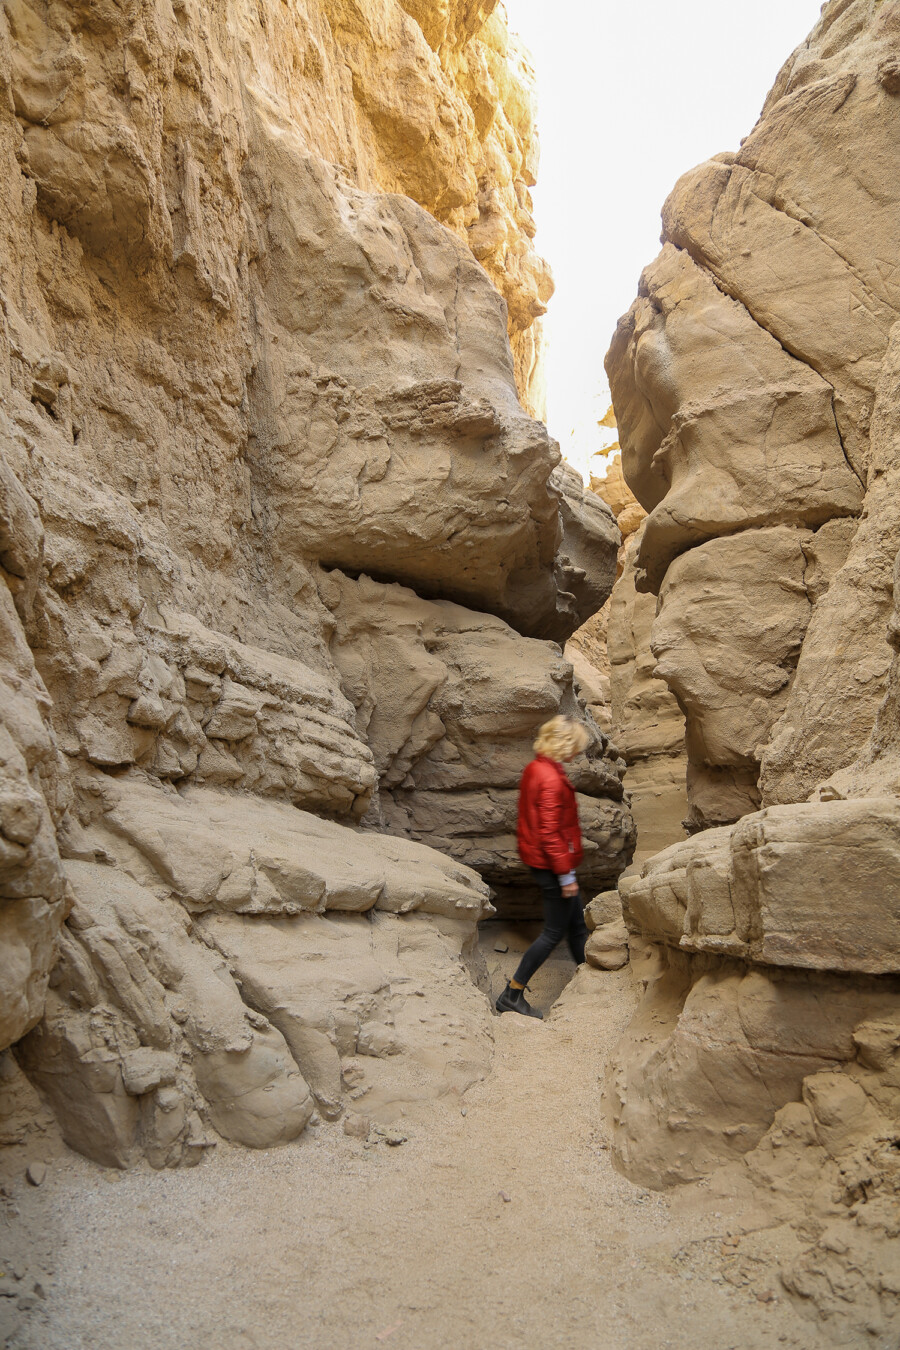 View of a woman hiking through a narrow rocky passageway at Slot Trail in Anza Borrego Desert State Park, California.